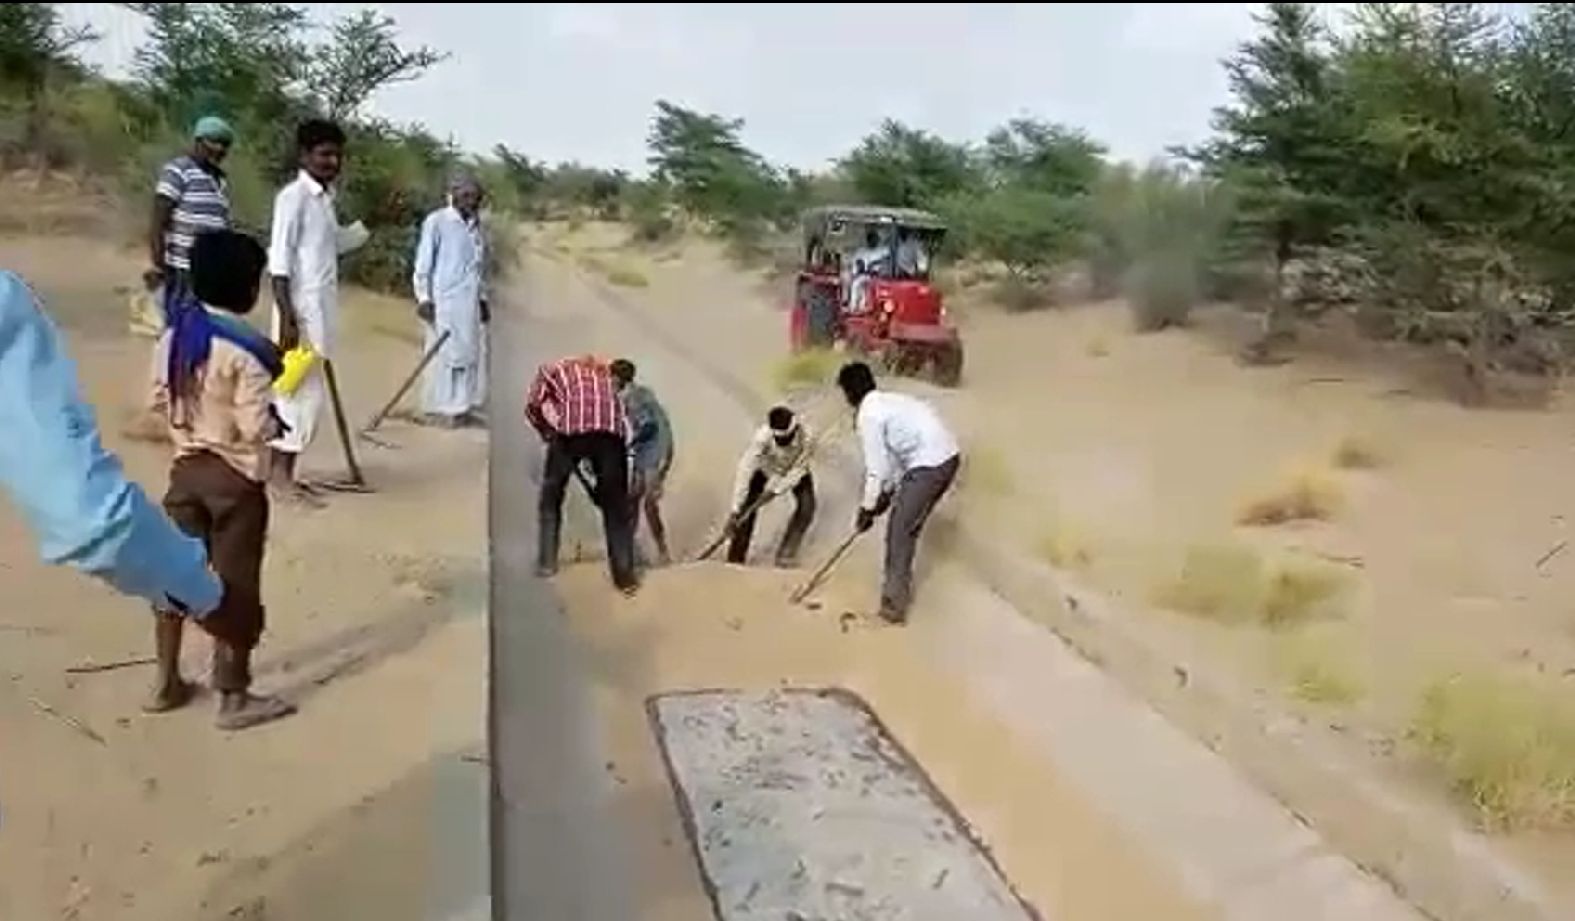 Farmers are extracting sand from canals in jaisalmer